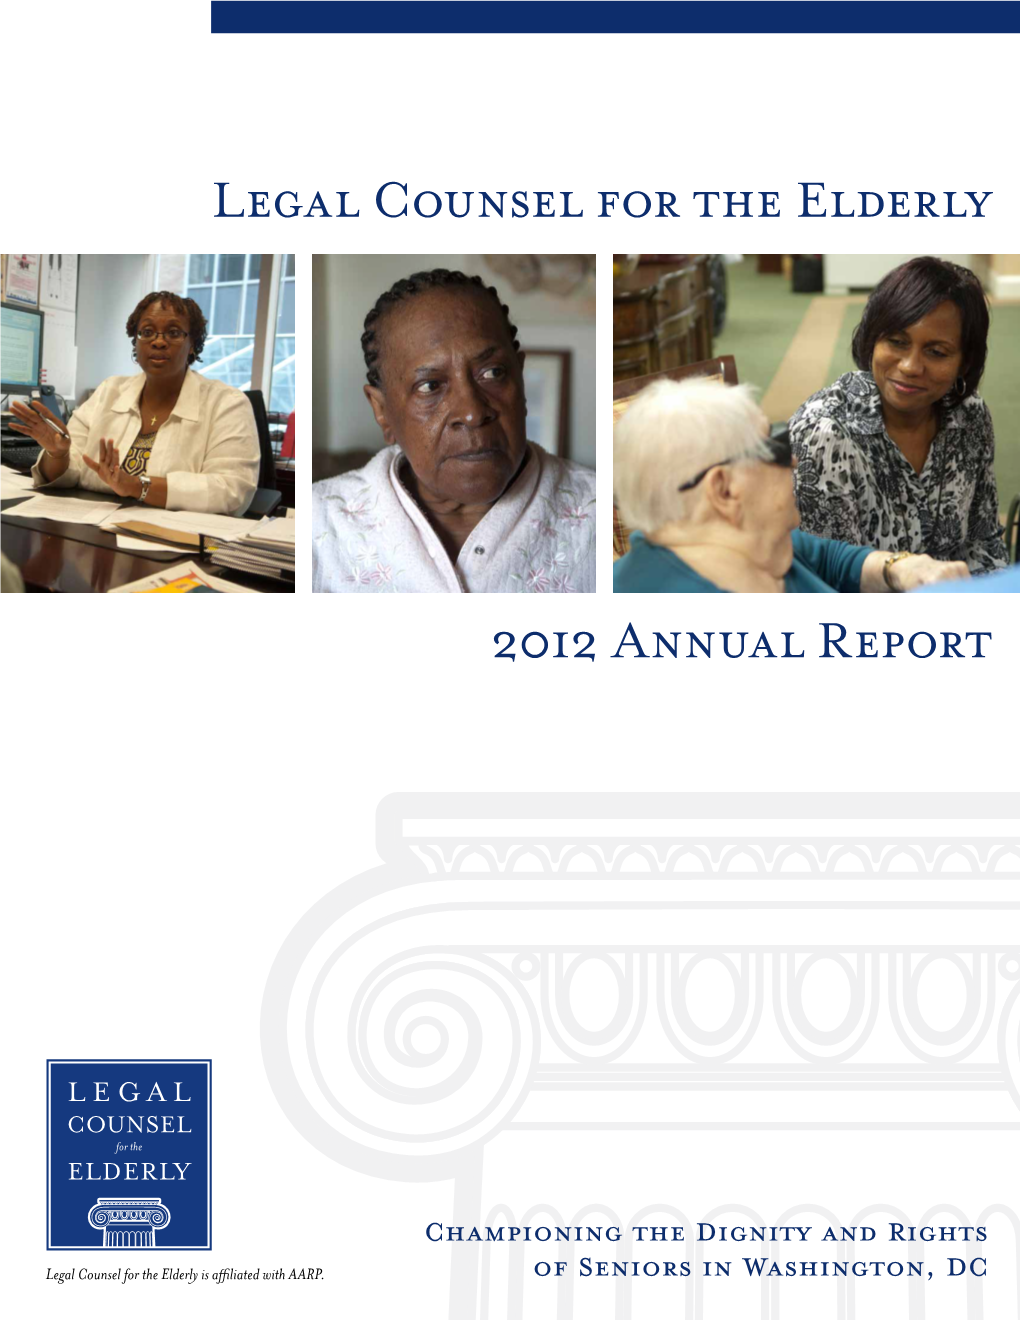 2012 Legal Counsel for the Elderly Annual Report